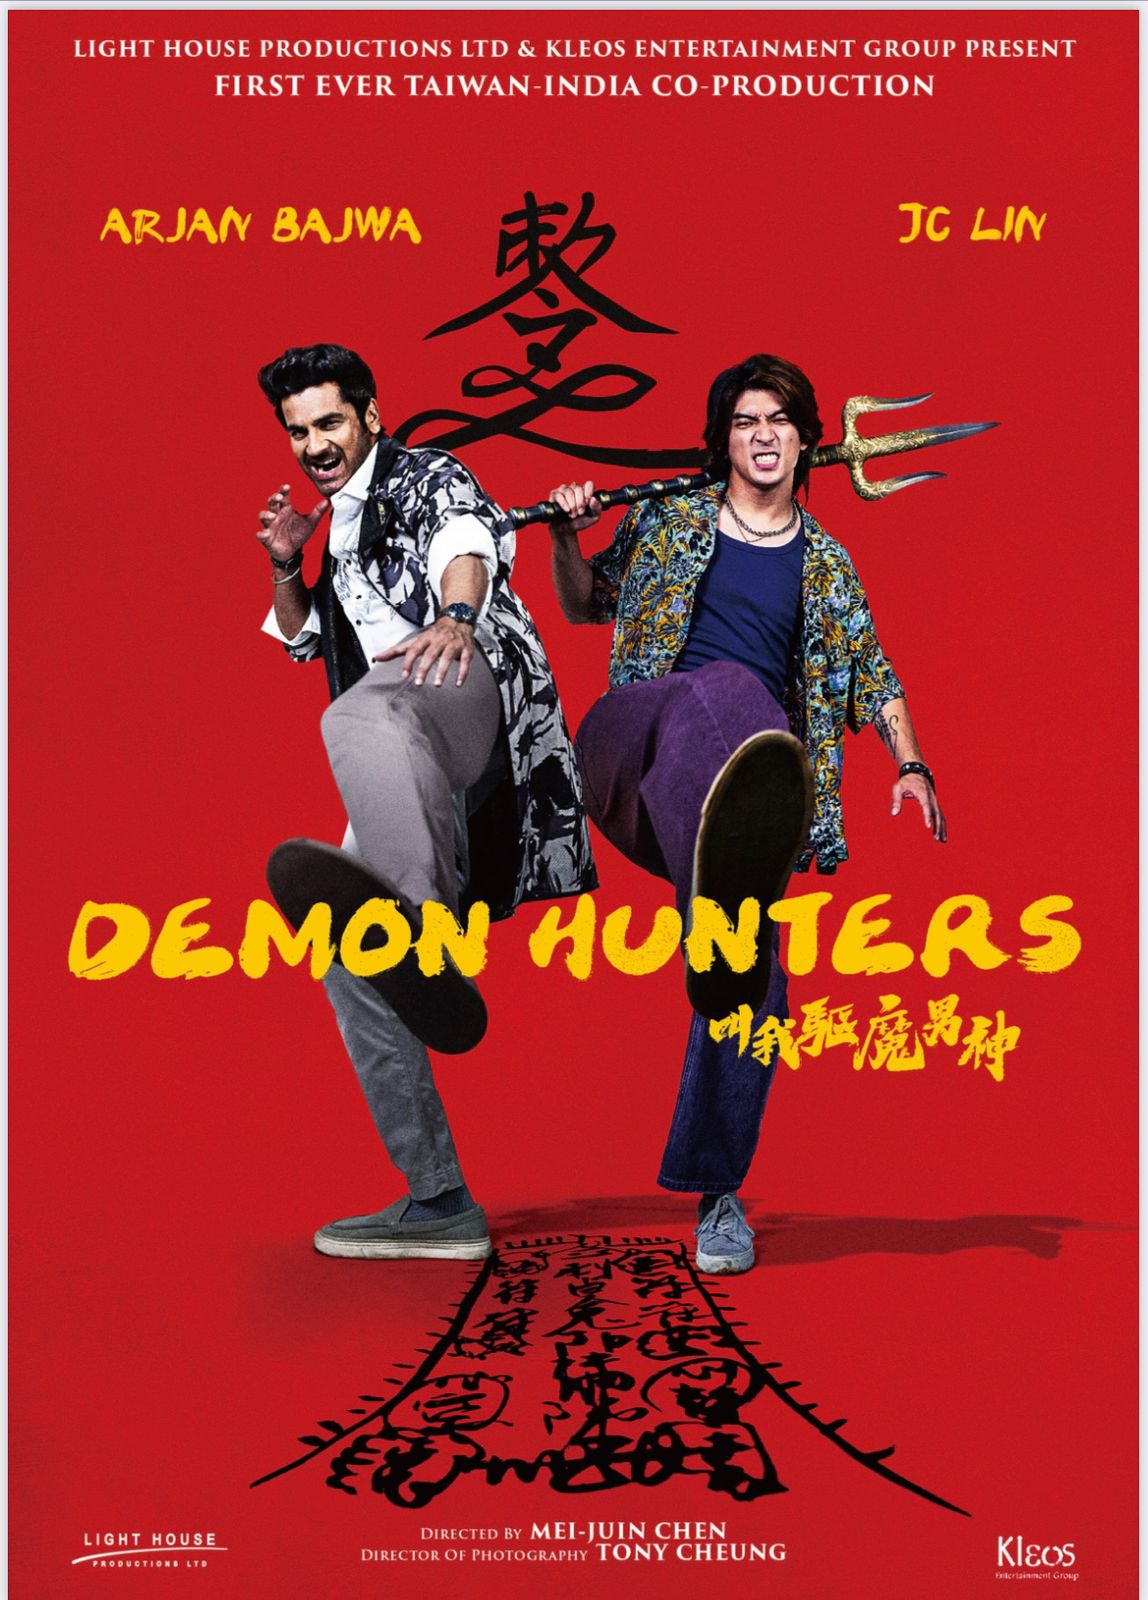 Taiwan-India action comedy Demon Hunters to debut first footage at Cannes Market